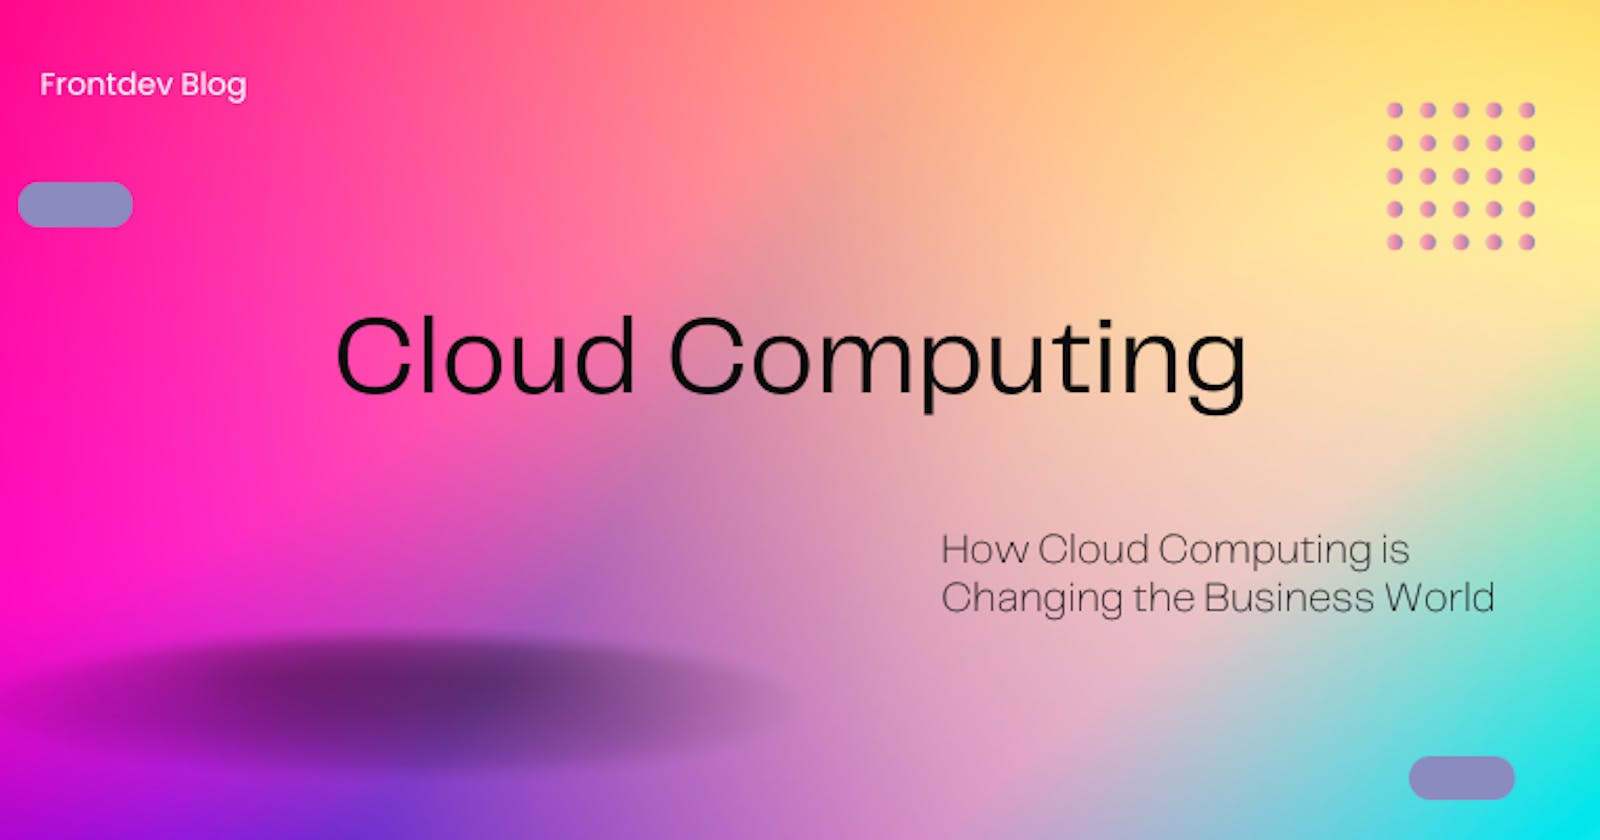 3 Ways Cloud Computing is Changing the Business World